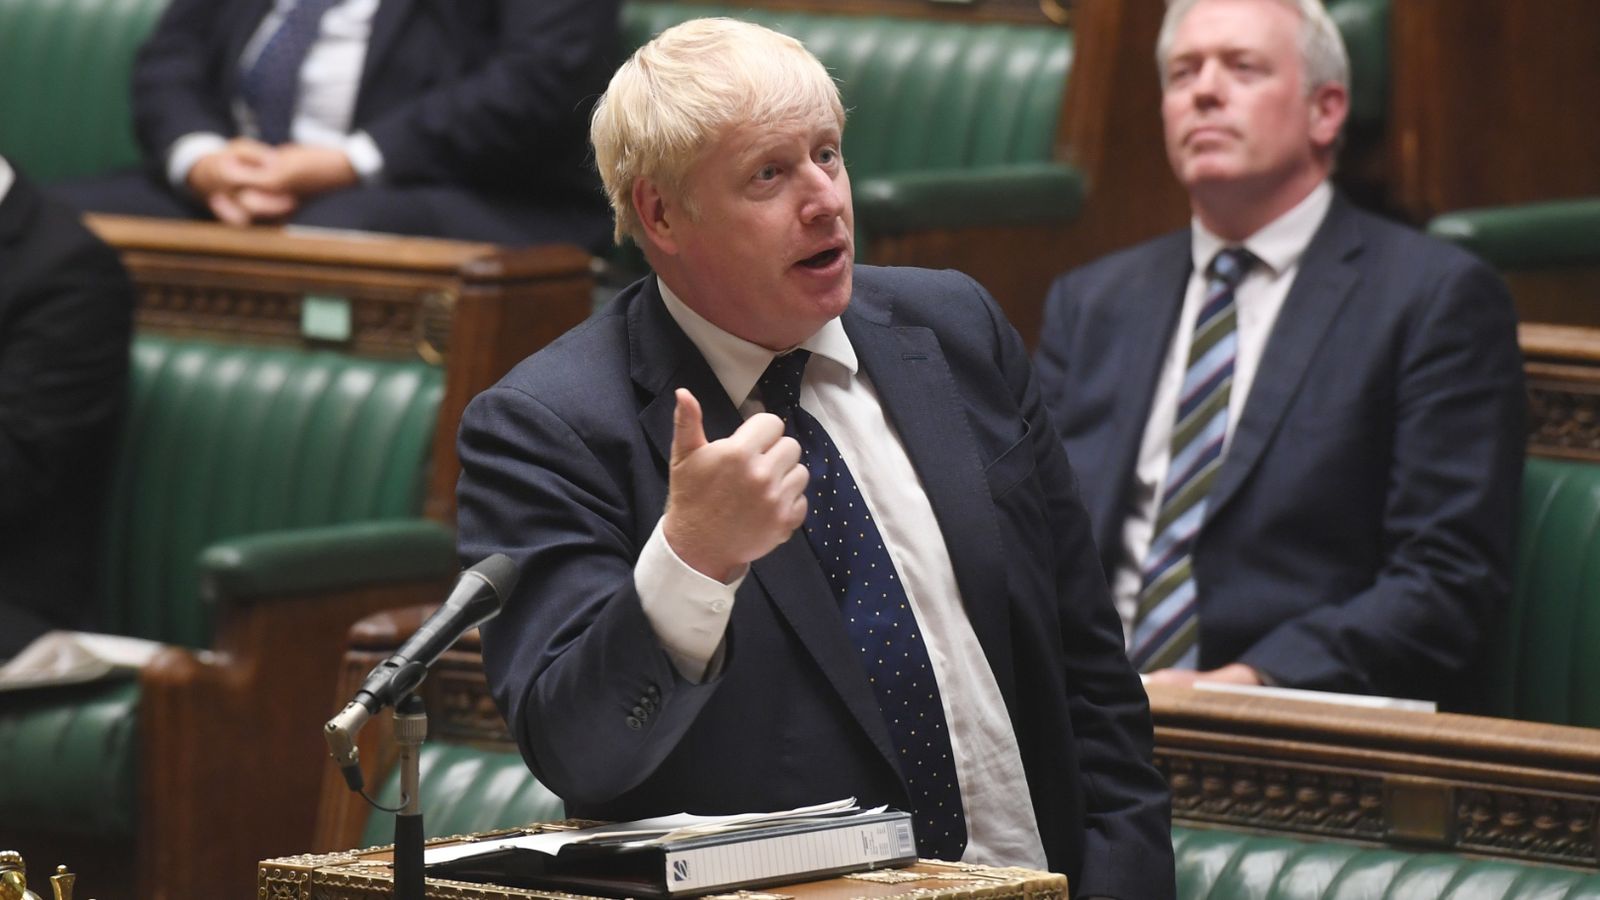 Boris Johnson pledges to end ‘catastrophic costs’ of social care with national insurance rise – but faces Tory mutiny